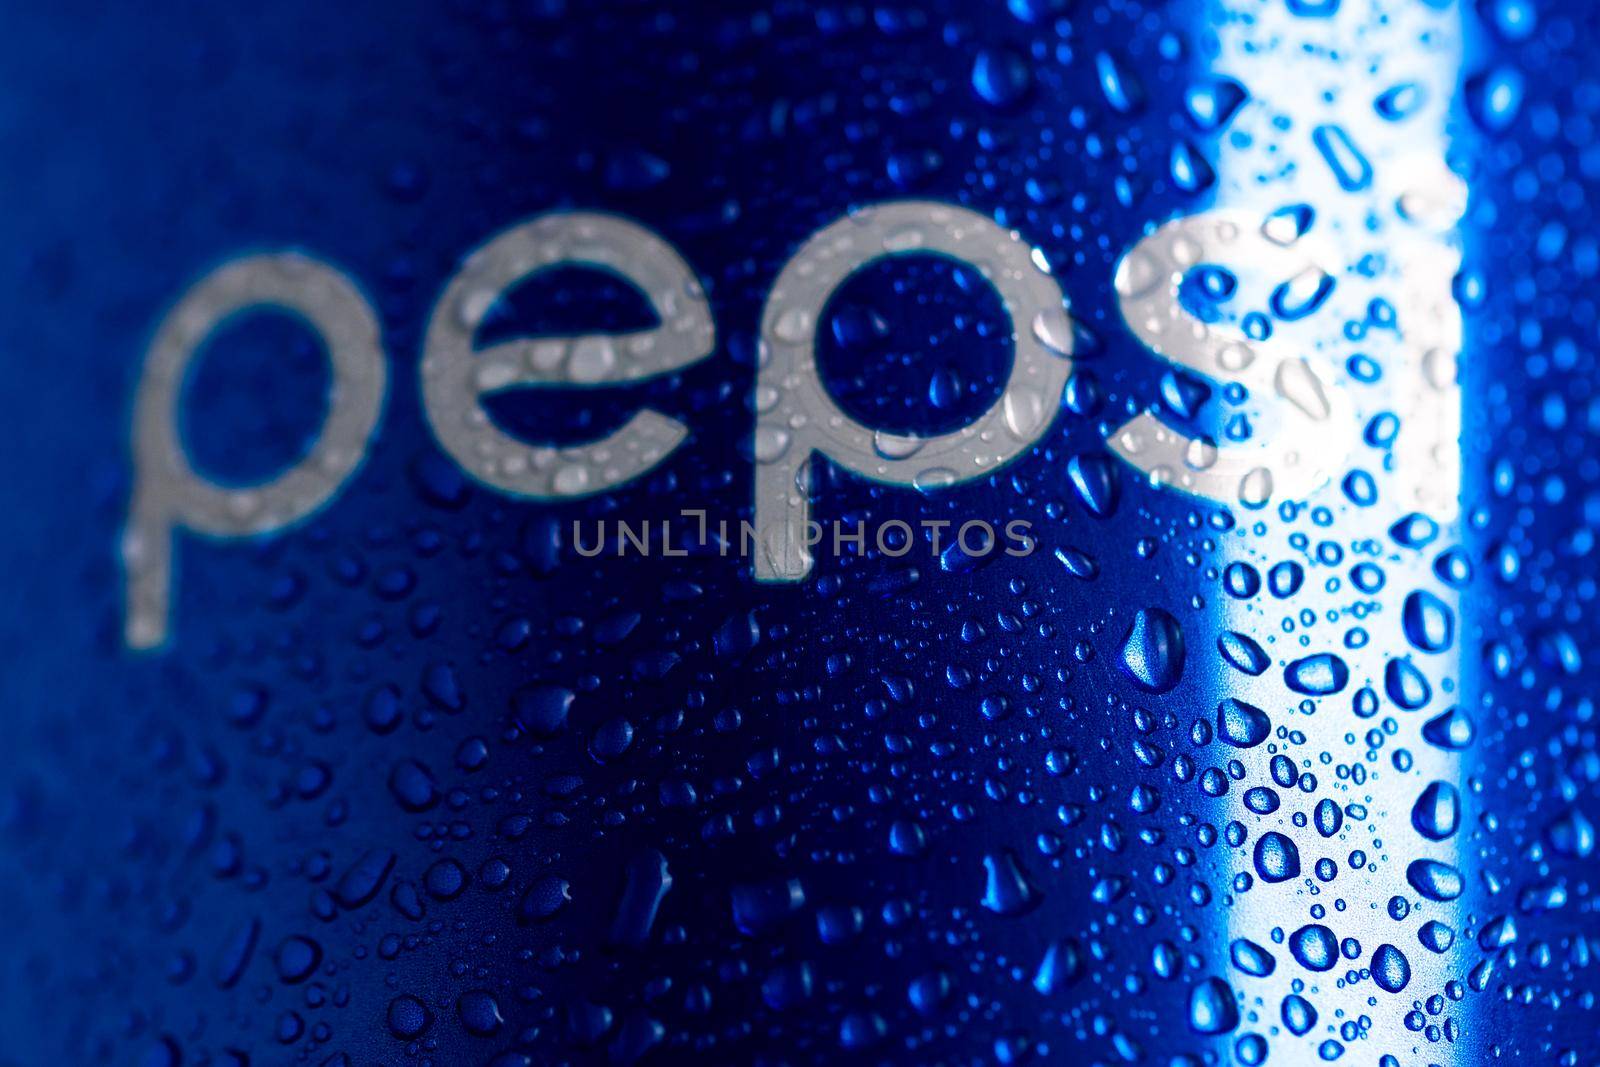 Detail of classic Pepsi can with water droplets on black background. Studio shot in Bucharest, Romania, 2021